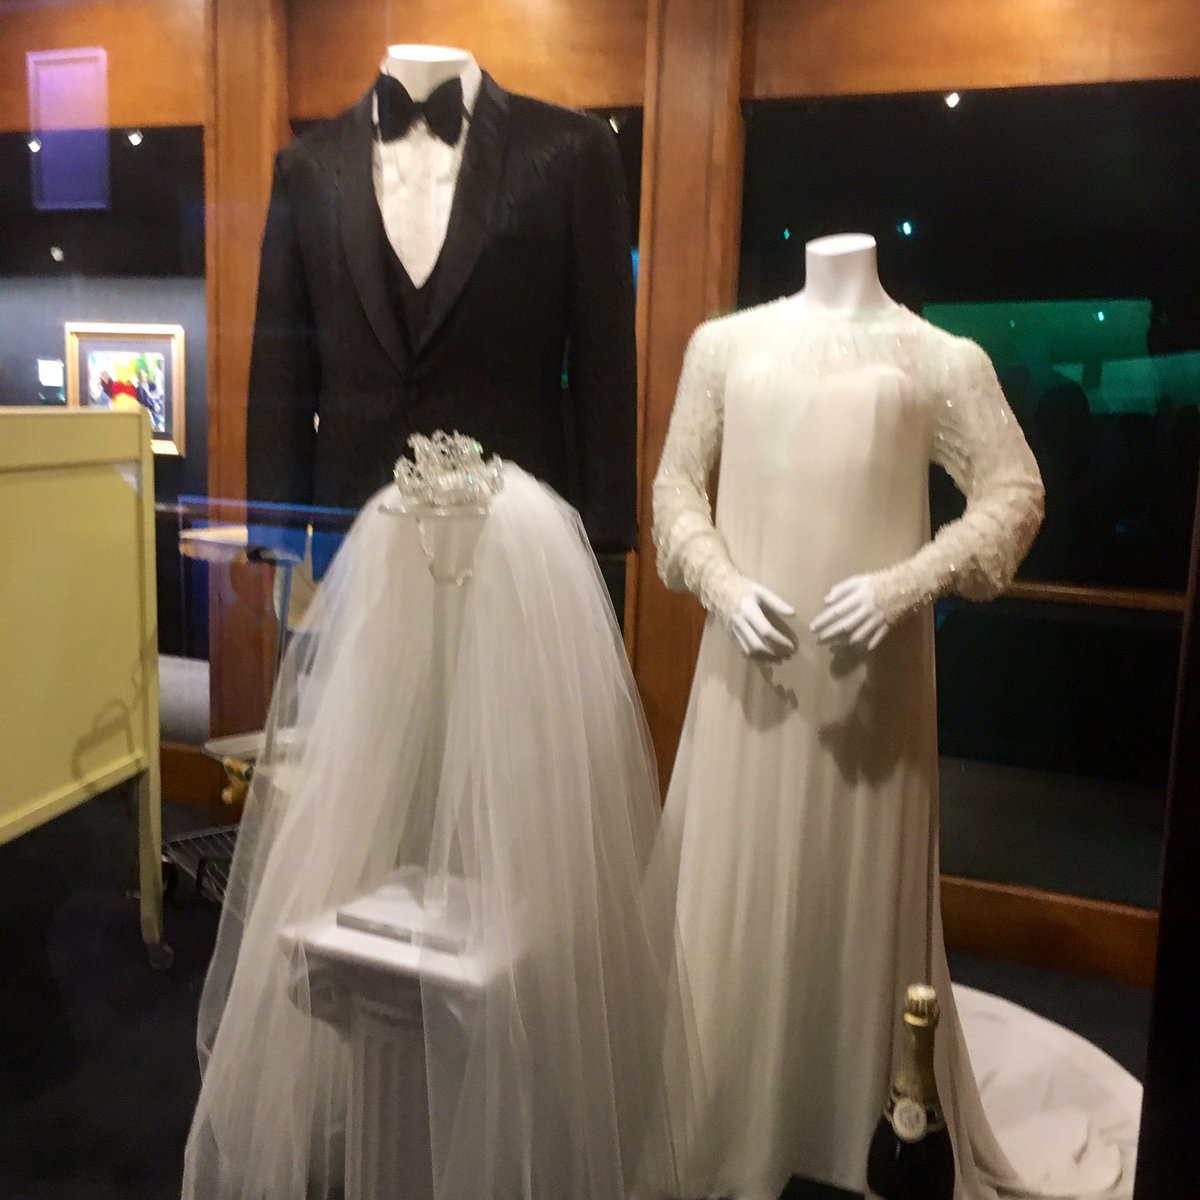  #WorkLifeBalance.… #wedding outfits,  #homeoffice,  #workclothes & the  #swimmingpool out back, on display at  #Elvis Presley’s home in Memphis:  #Graceland.